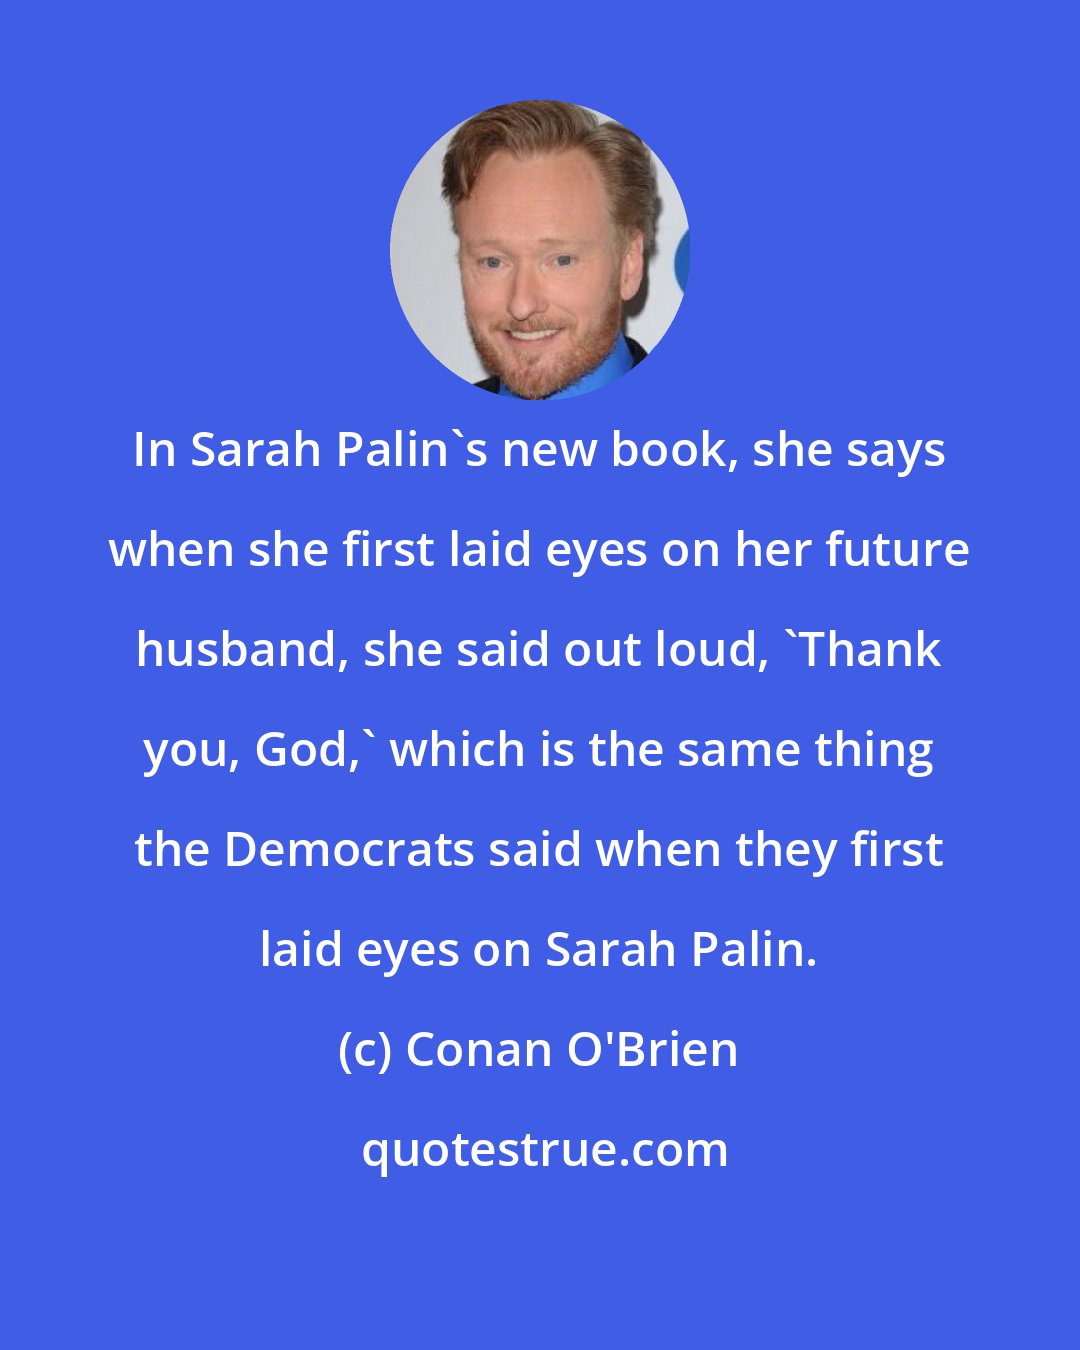 Conan O'Brien: In Sarah Palin's new book, she says when she first laid eyes on her future husband, she said out loud, 'Thank you, God,' which is the same thing the Democrats said when they first laid eyes on Sarah Palin.